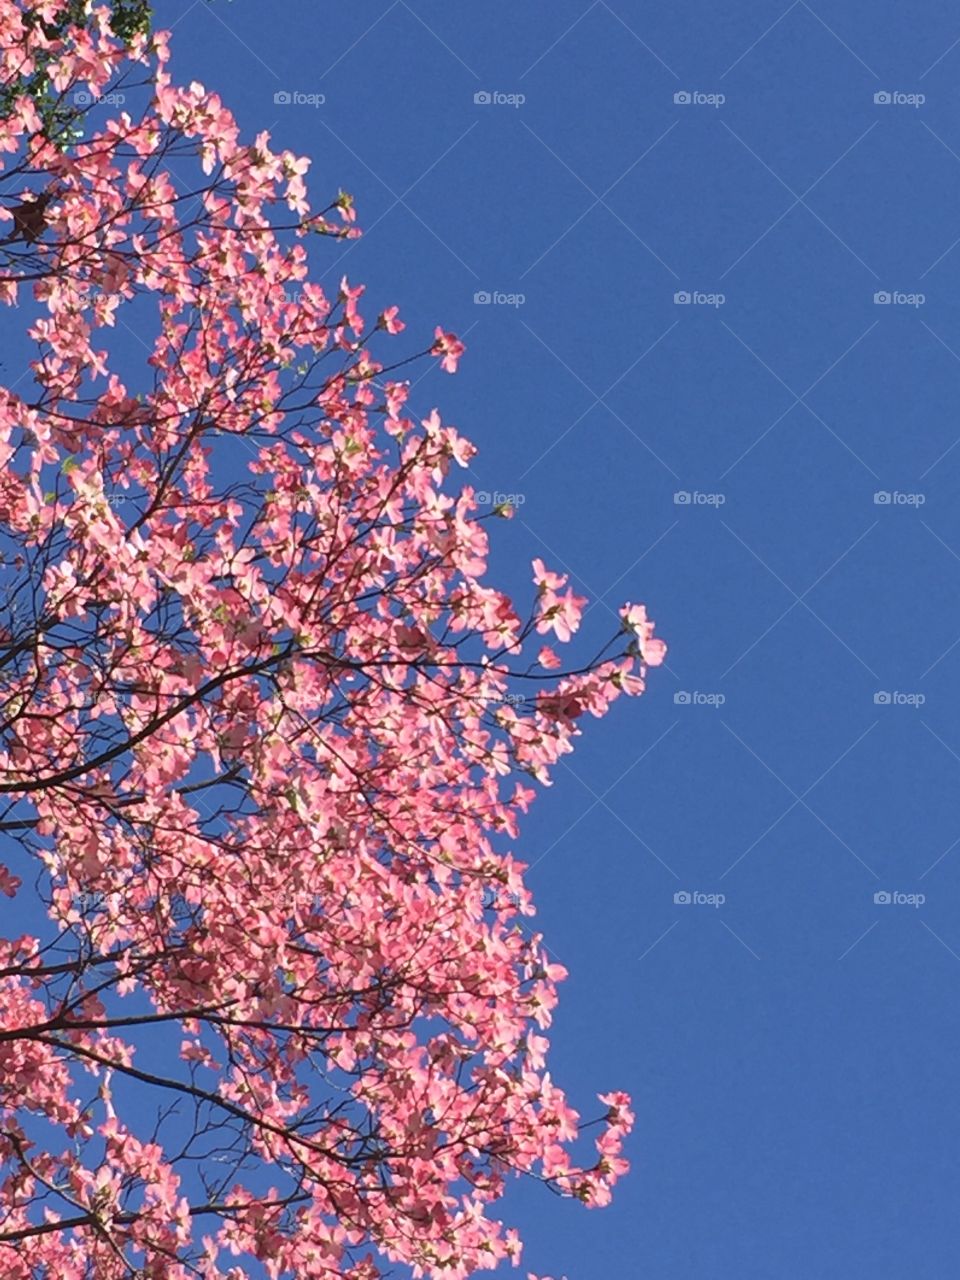 Pink and white flowers of a dogwood tree in front of a crystal clear blue sky.